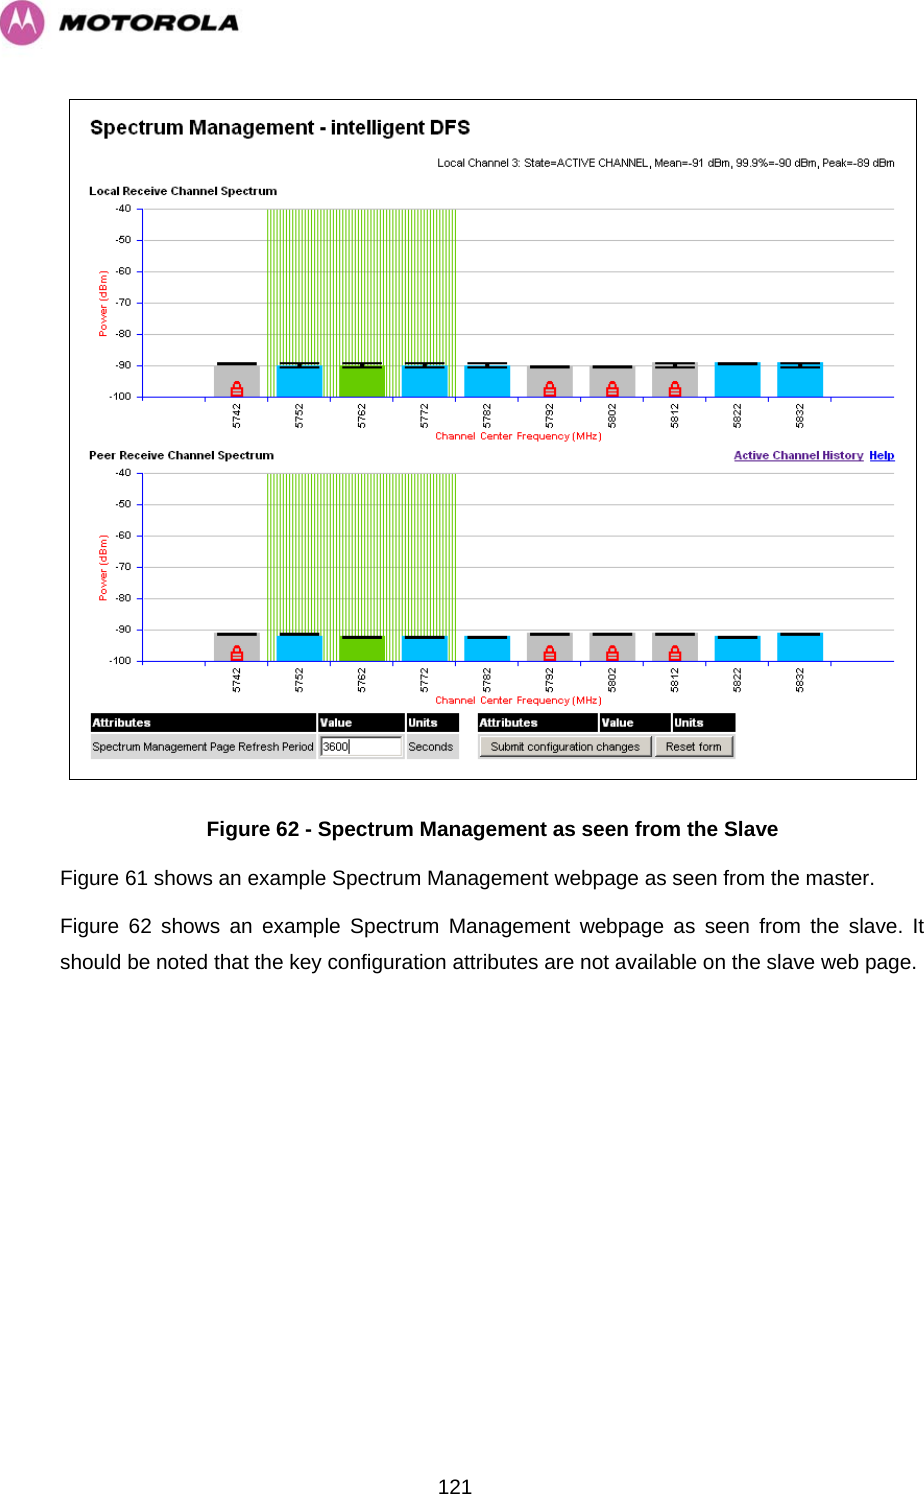   121 Figure 62 - Spectrum Management as seen from the Slave Figure 61 shows an example Spectrum Management webpage as seen from the master.  Figure 62 shows an example Spectrum Management webpage as seen from the slave. It should be noted that the key configuration attributes are not available on the slave web page.  